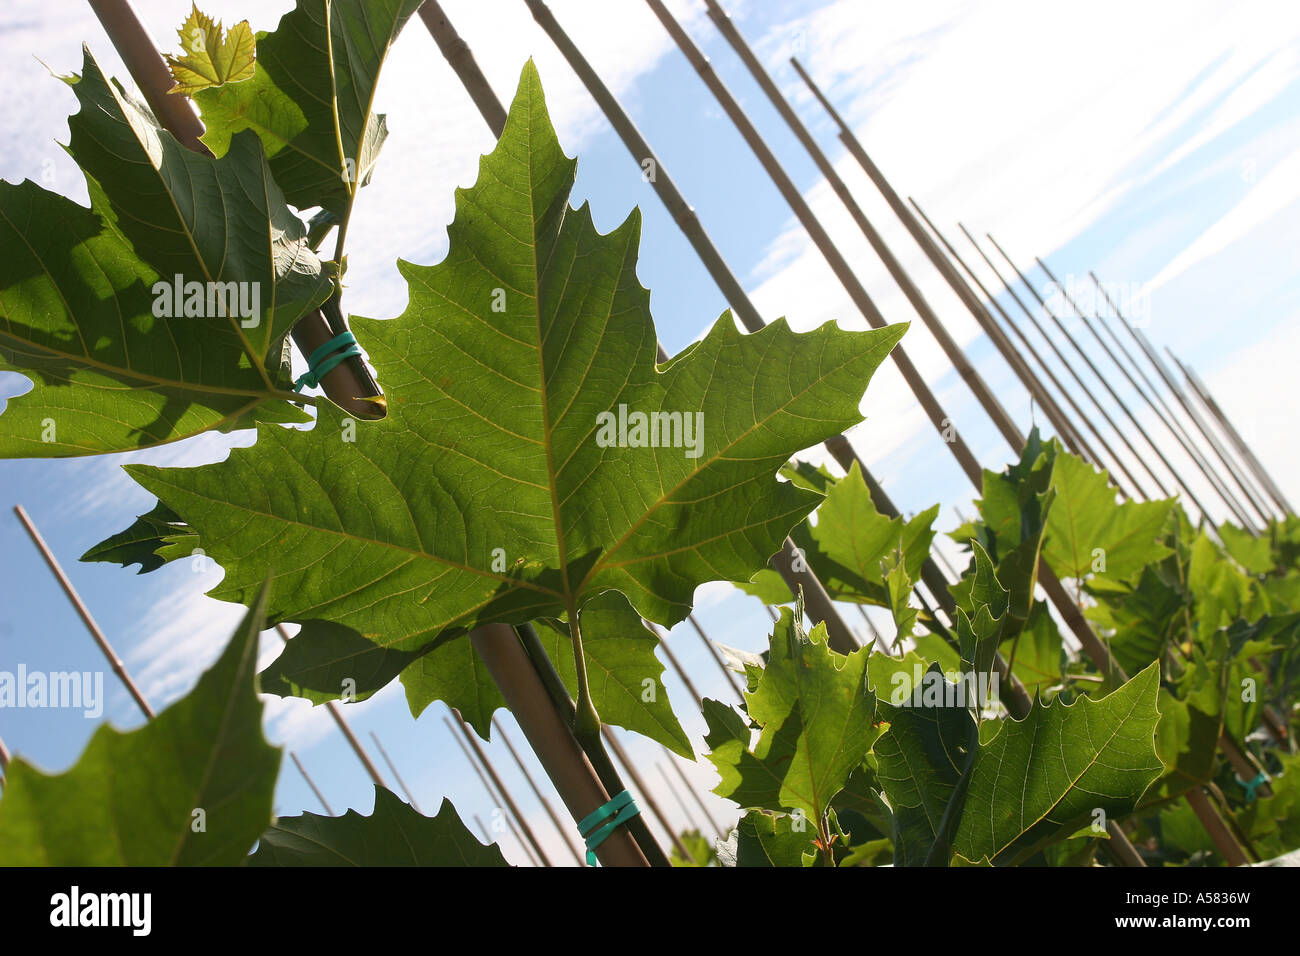 Young maple trees in a tree nursery Stock Photo